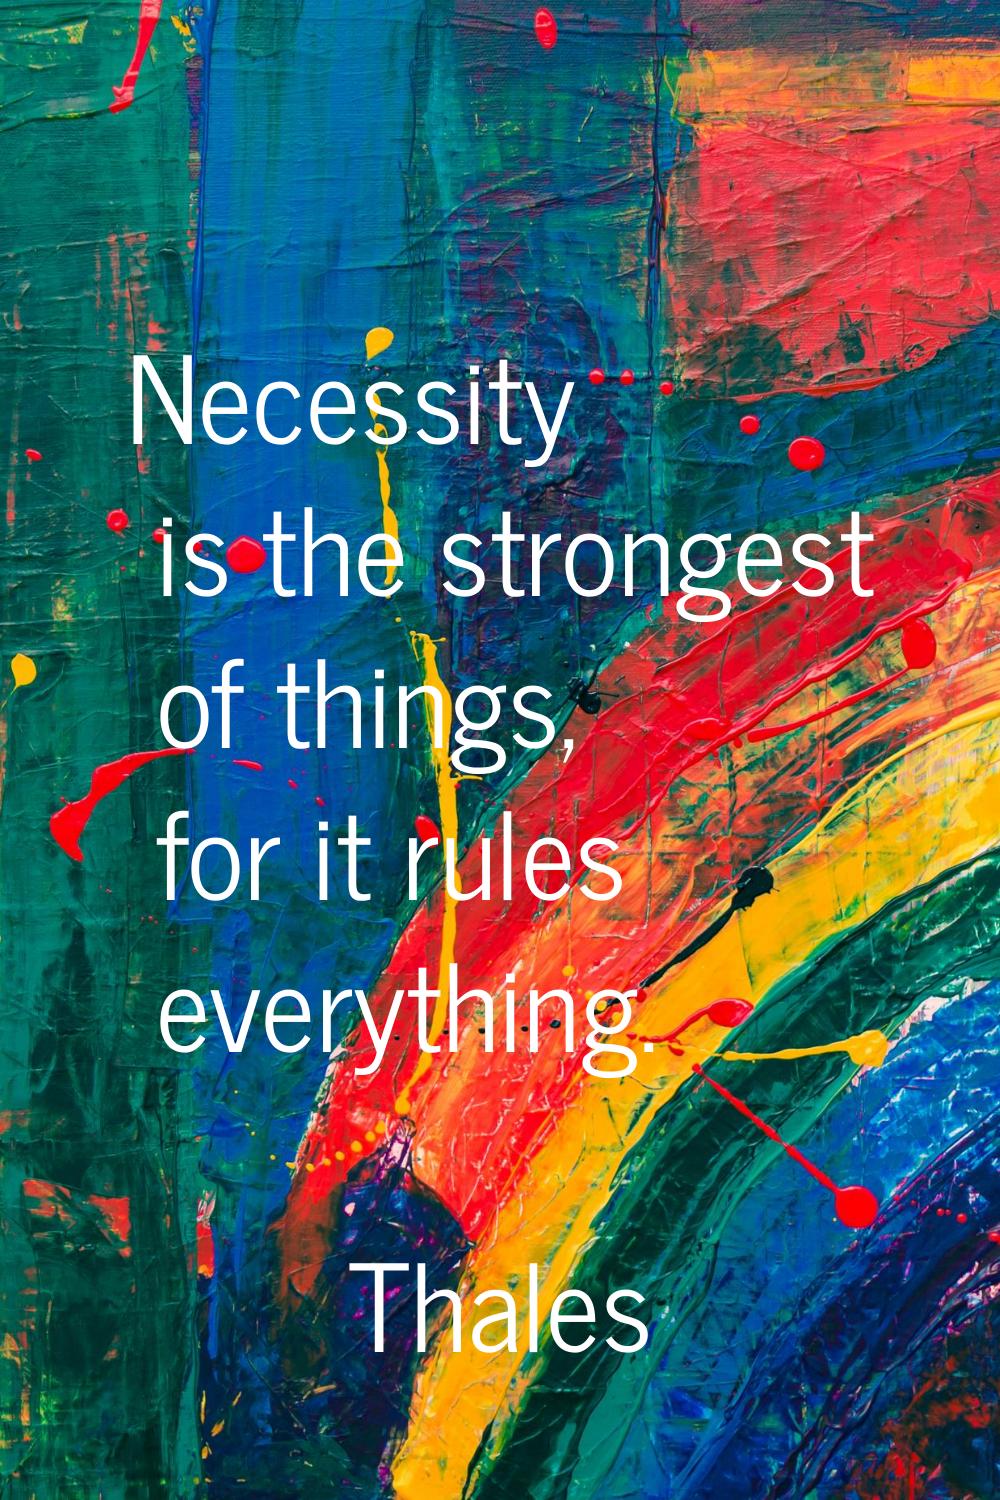 Necessity is the strongest of things, for it rules everything.